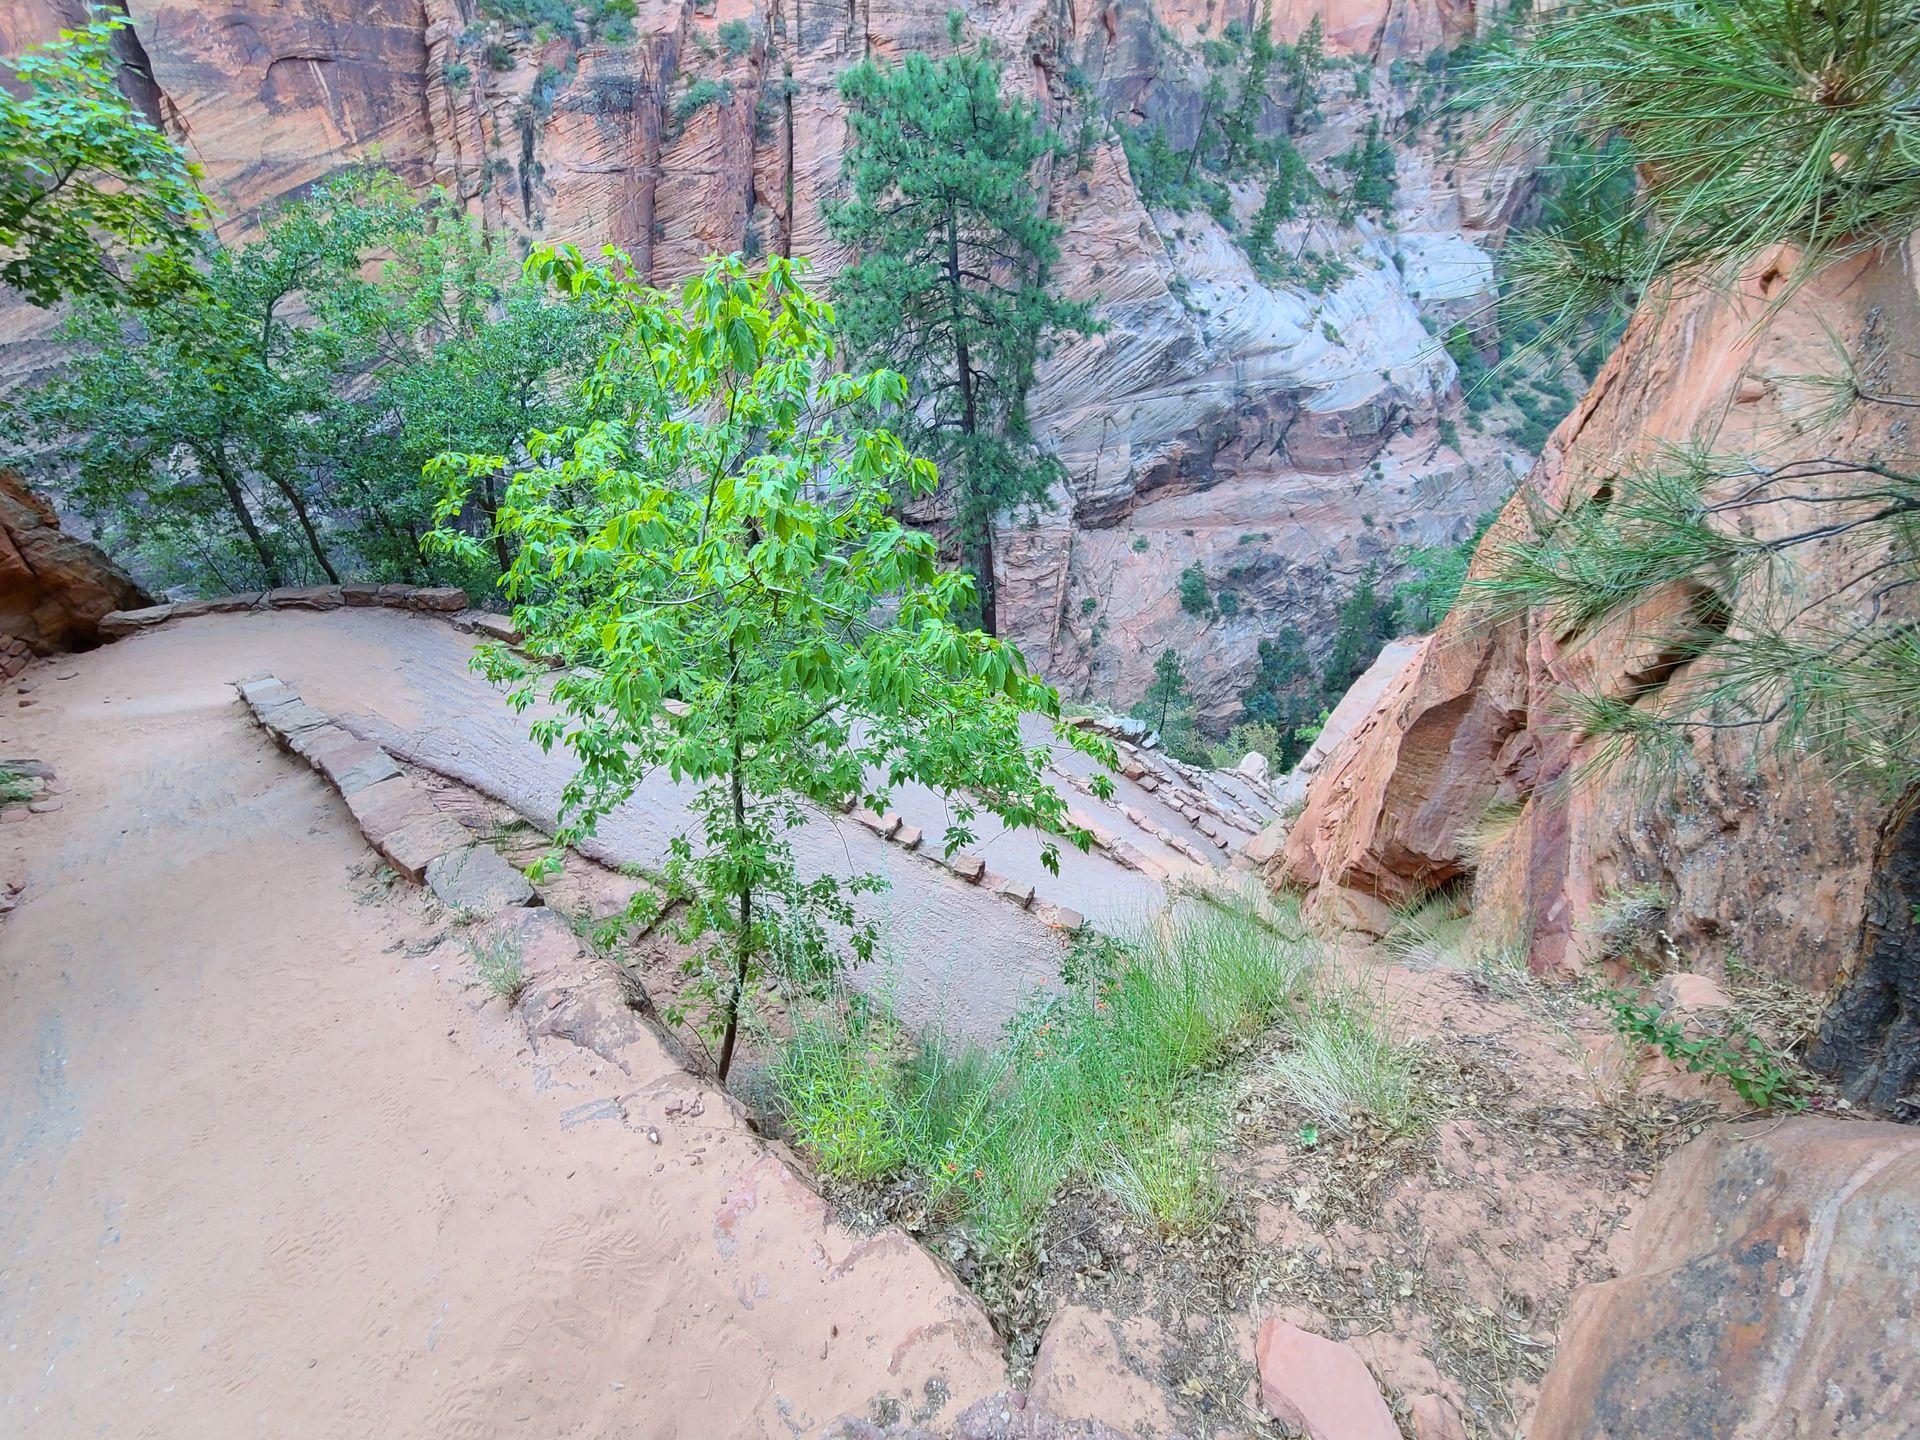 Looking down at a set up tight switchbacks on the Angel's Landing trail.